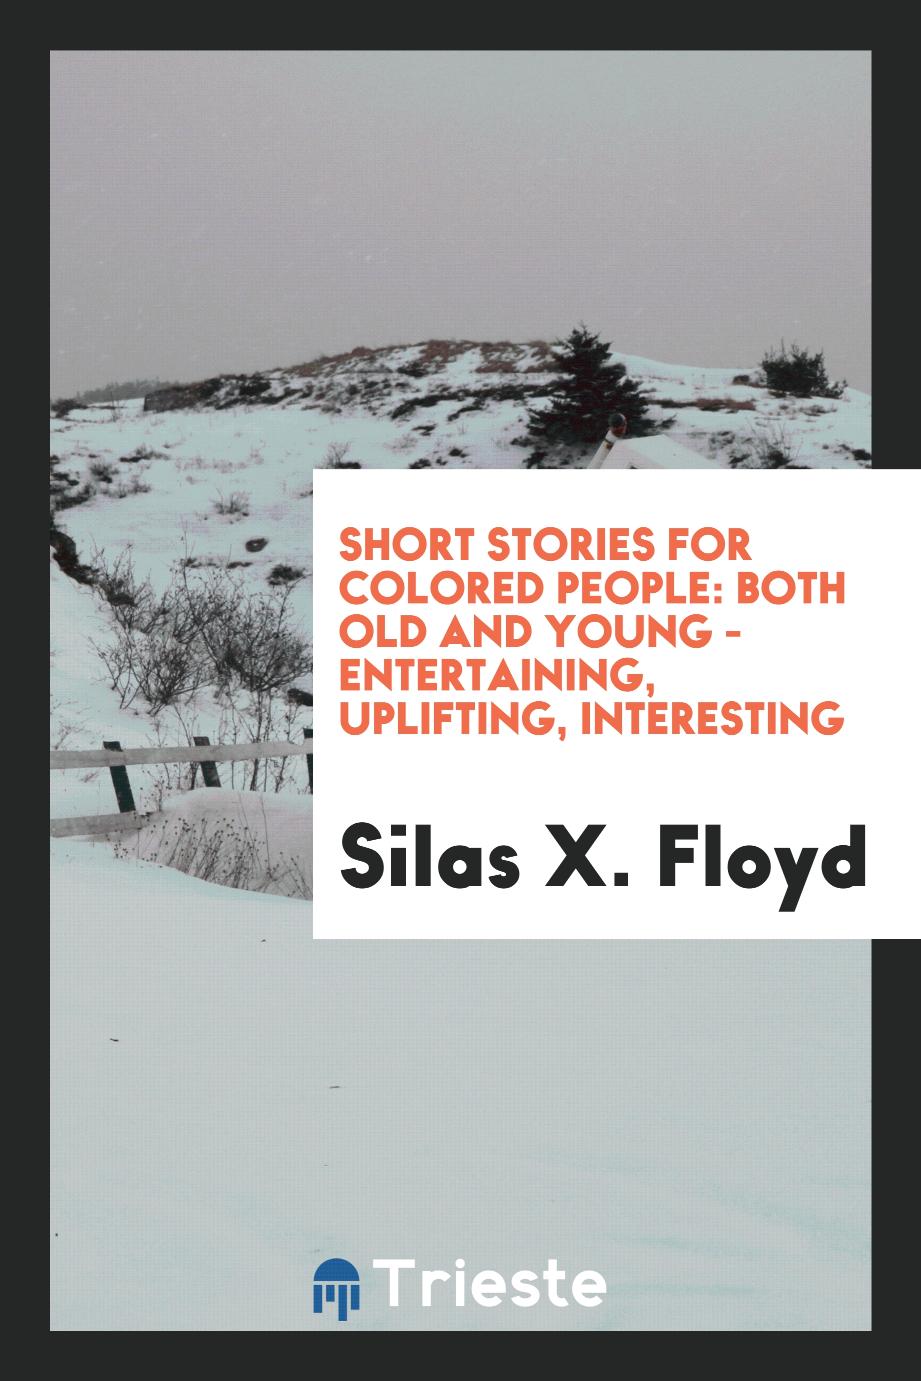 Short stories for colored people: both old and young - entertaining, uplifting, interesting